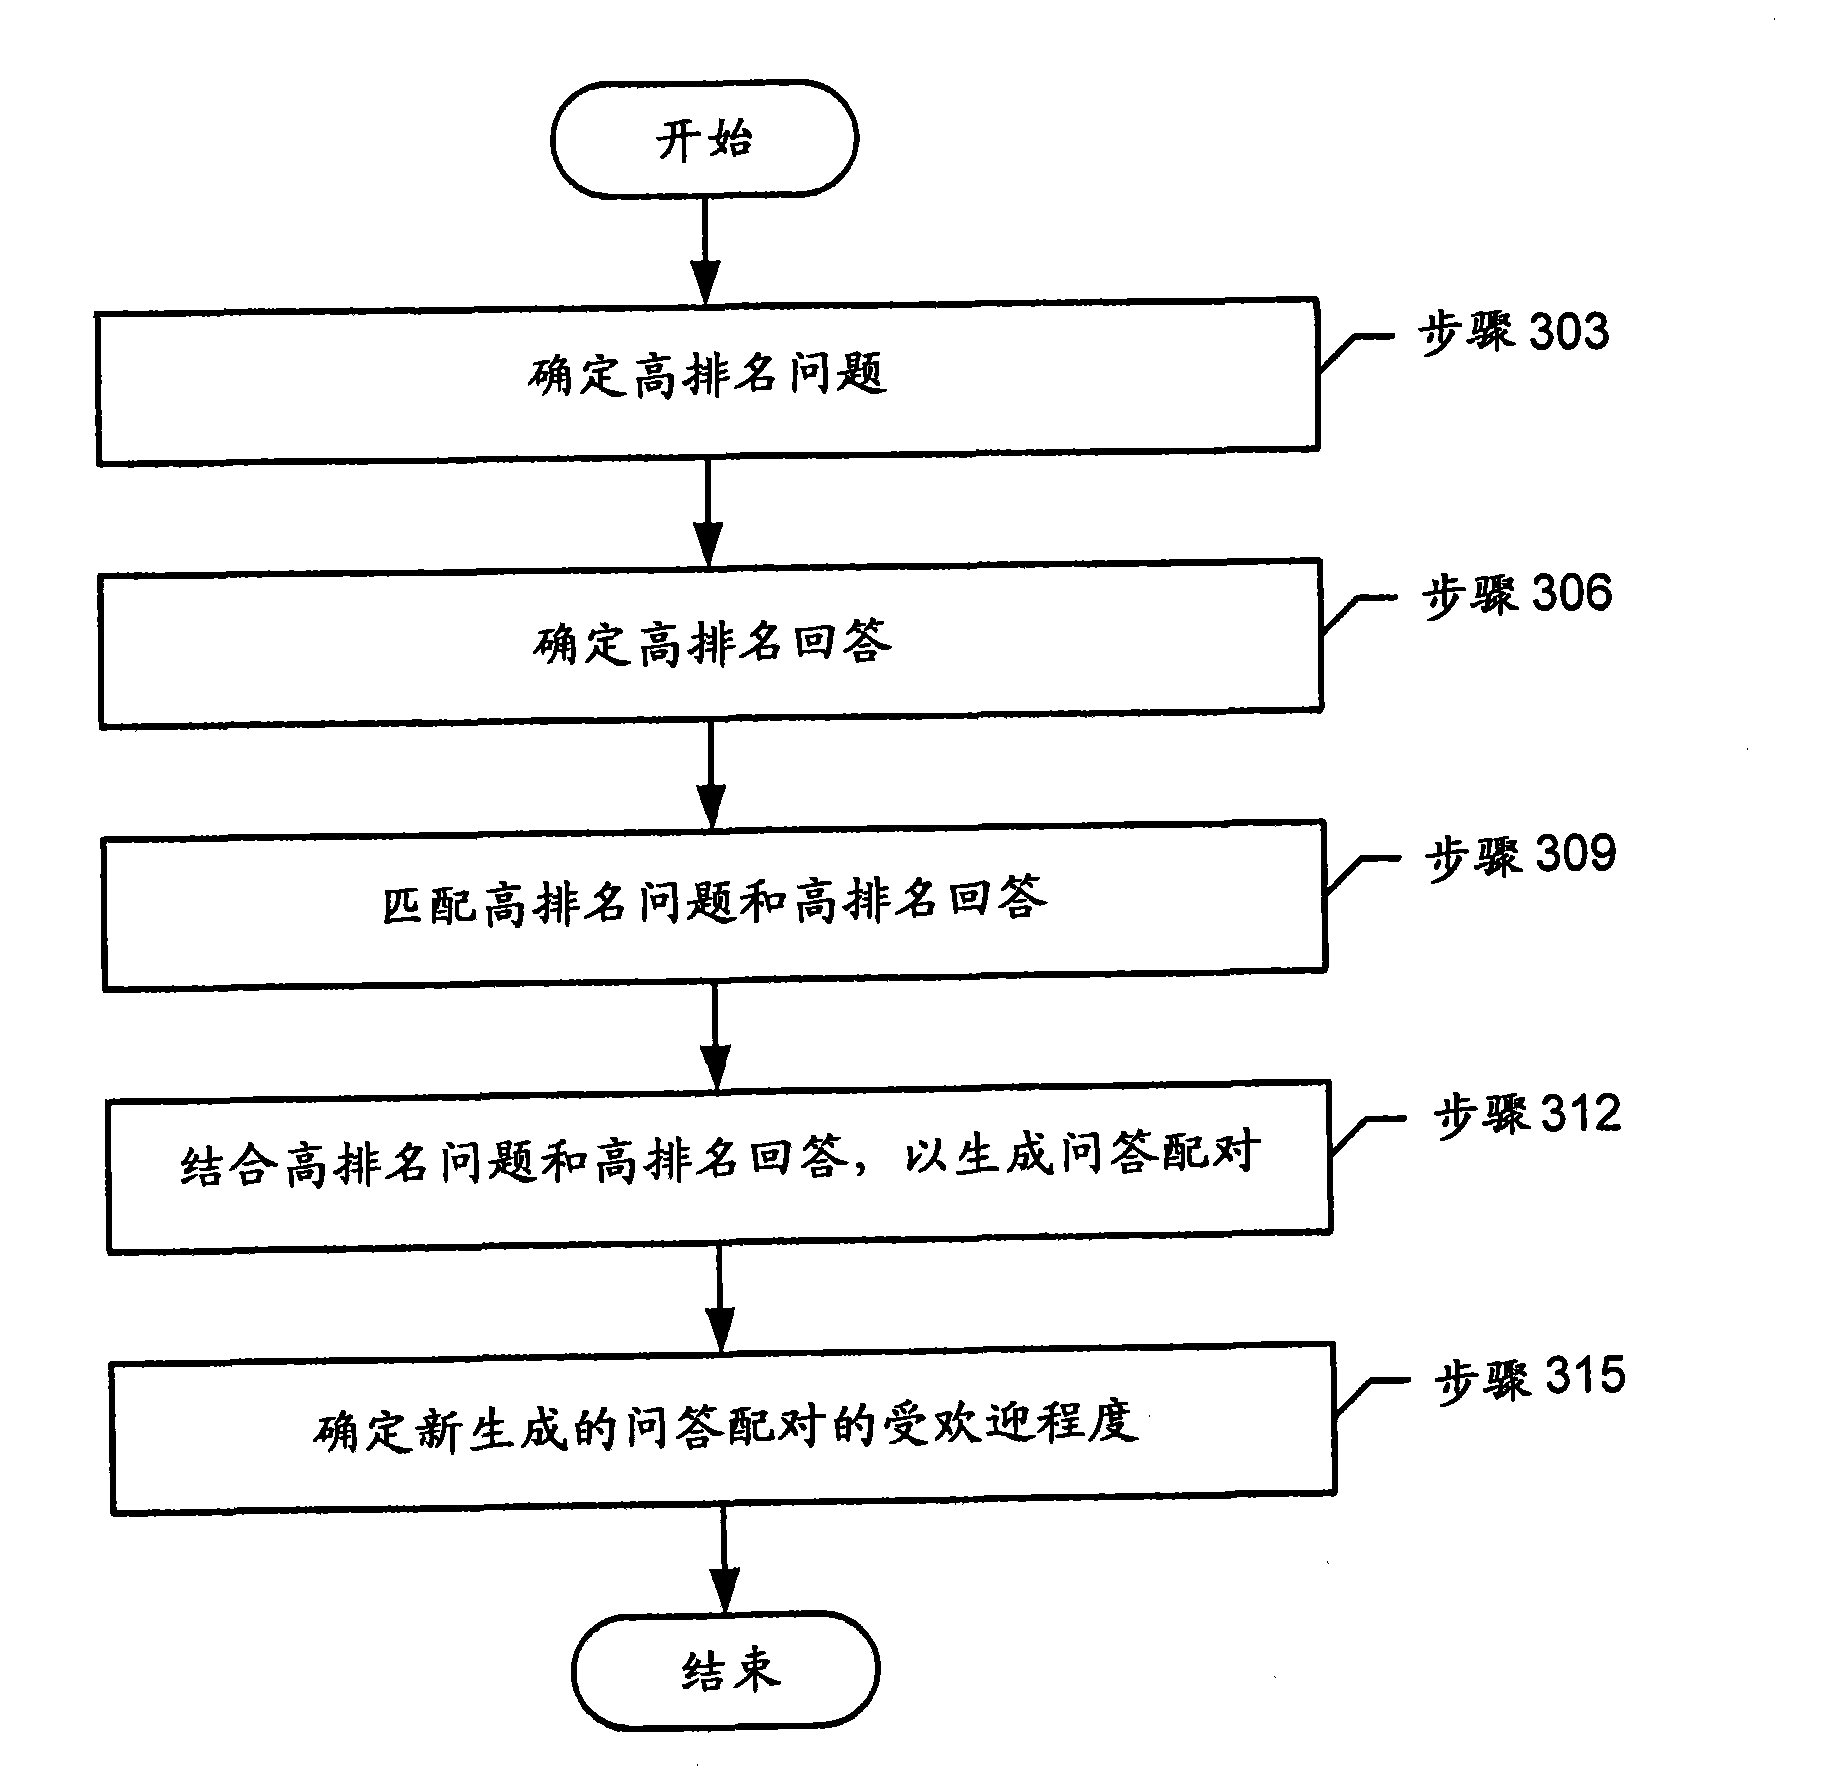 Method and system for generating a dynamic help document